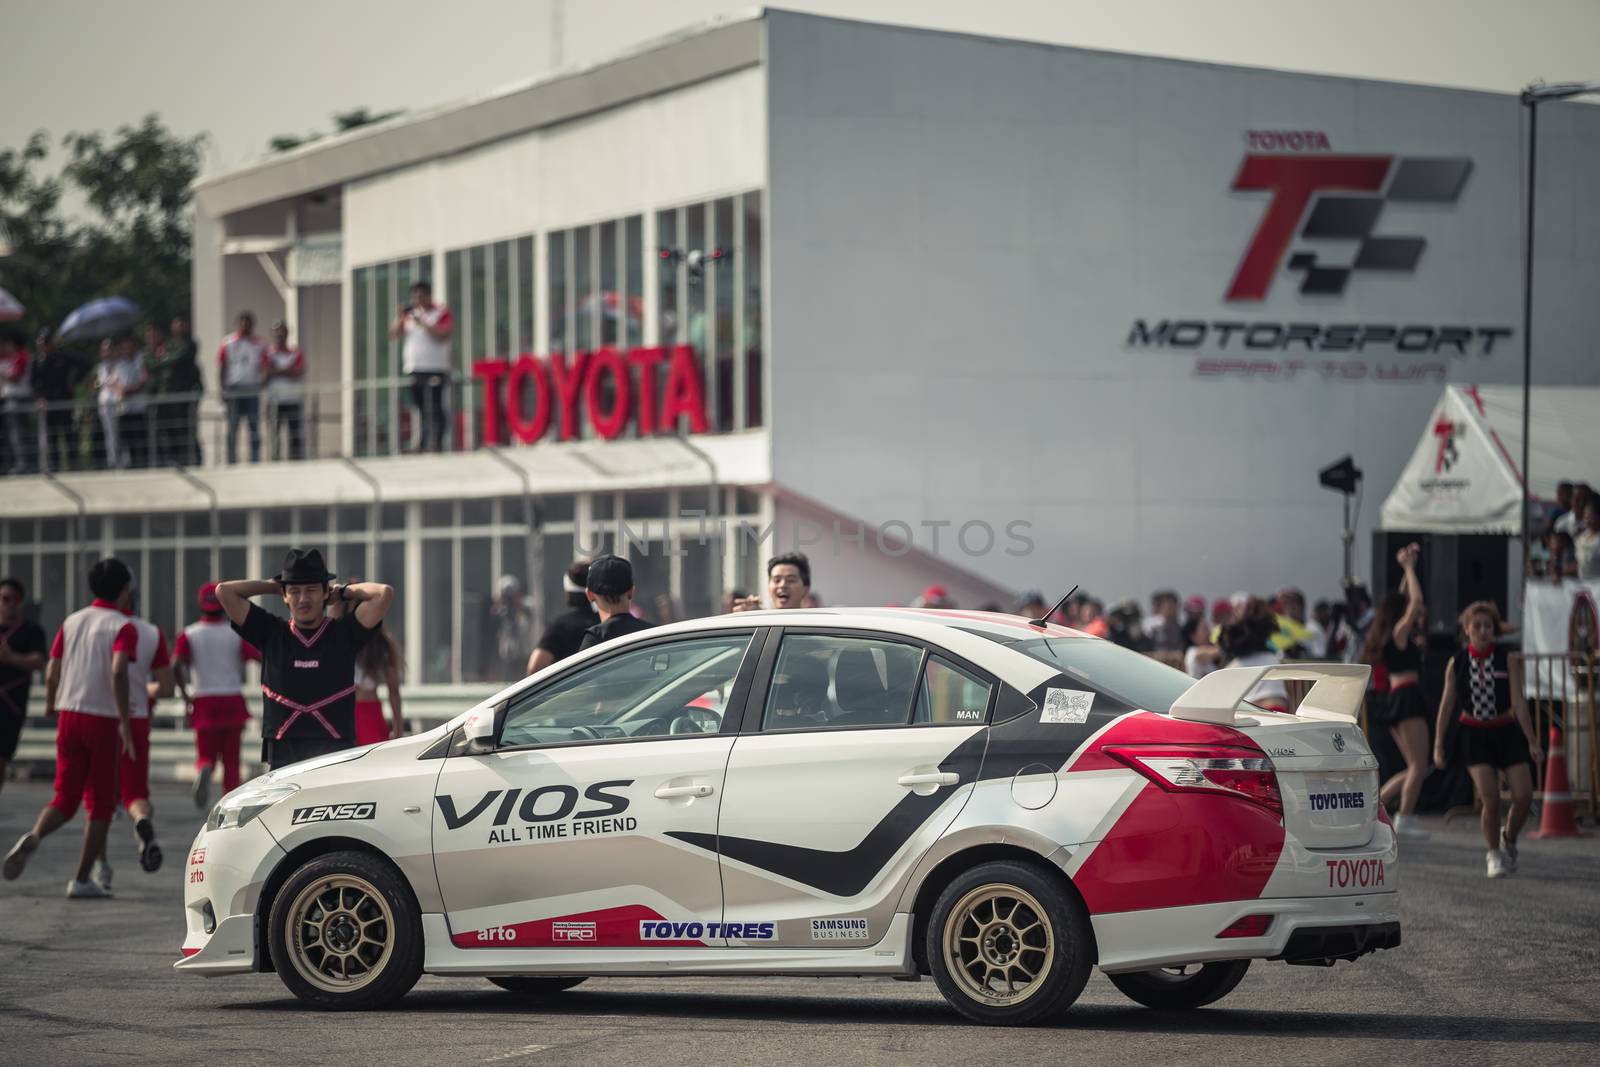 Udon Thani, Thailand - October 18, 2015: Toyota Colora Altis performance show on the track at the event Toyota Motor Sport show at Udon Thani, Thailand. This show is that the car carry a cheer leader for the dance show at the breaking time.